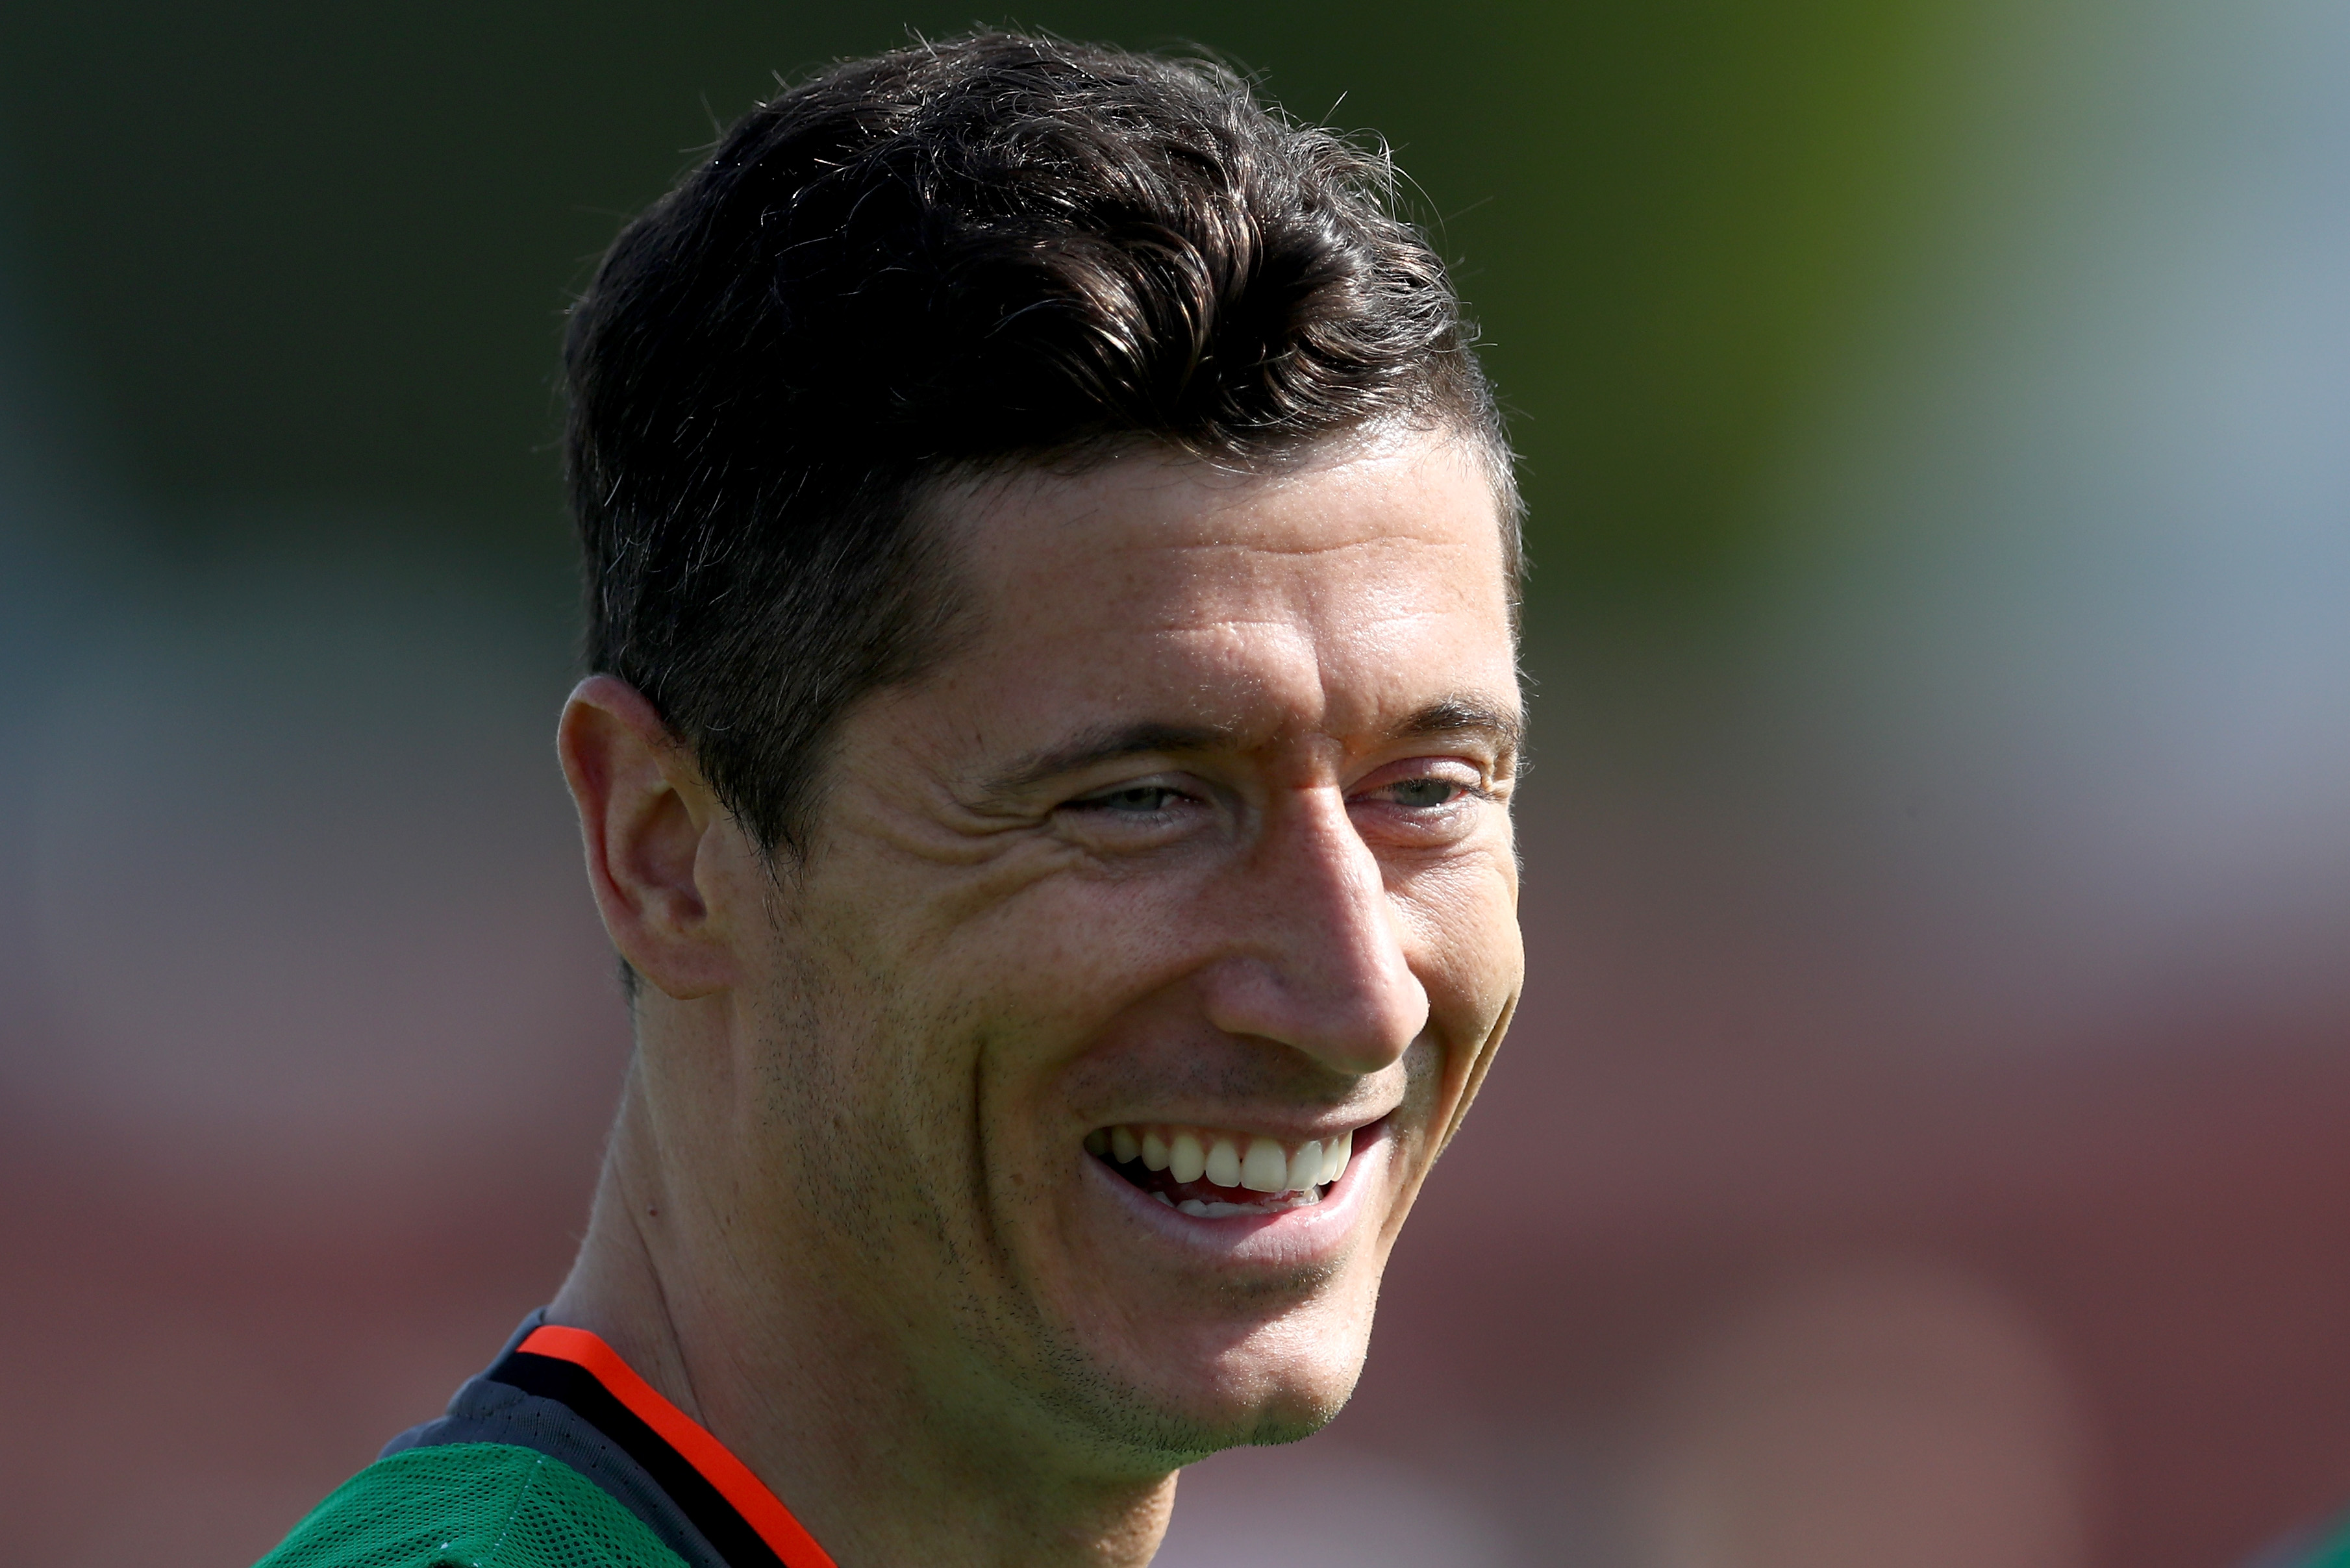 A man in demand - Several clubs have made a beeline for Robert Lewandowski, with an unnamed club from China his latest suitors. (Photo by Lars Baron/Bongarts/Getty Images)